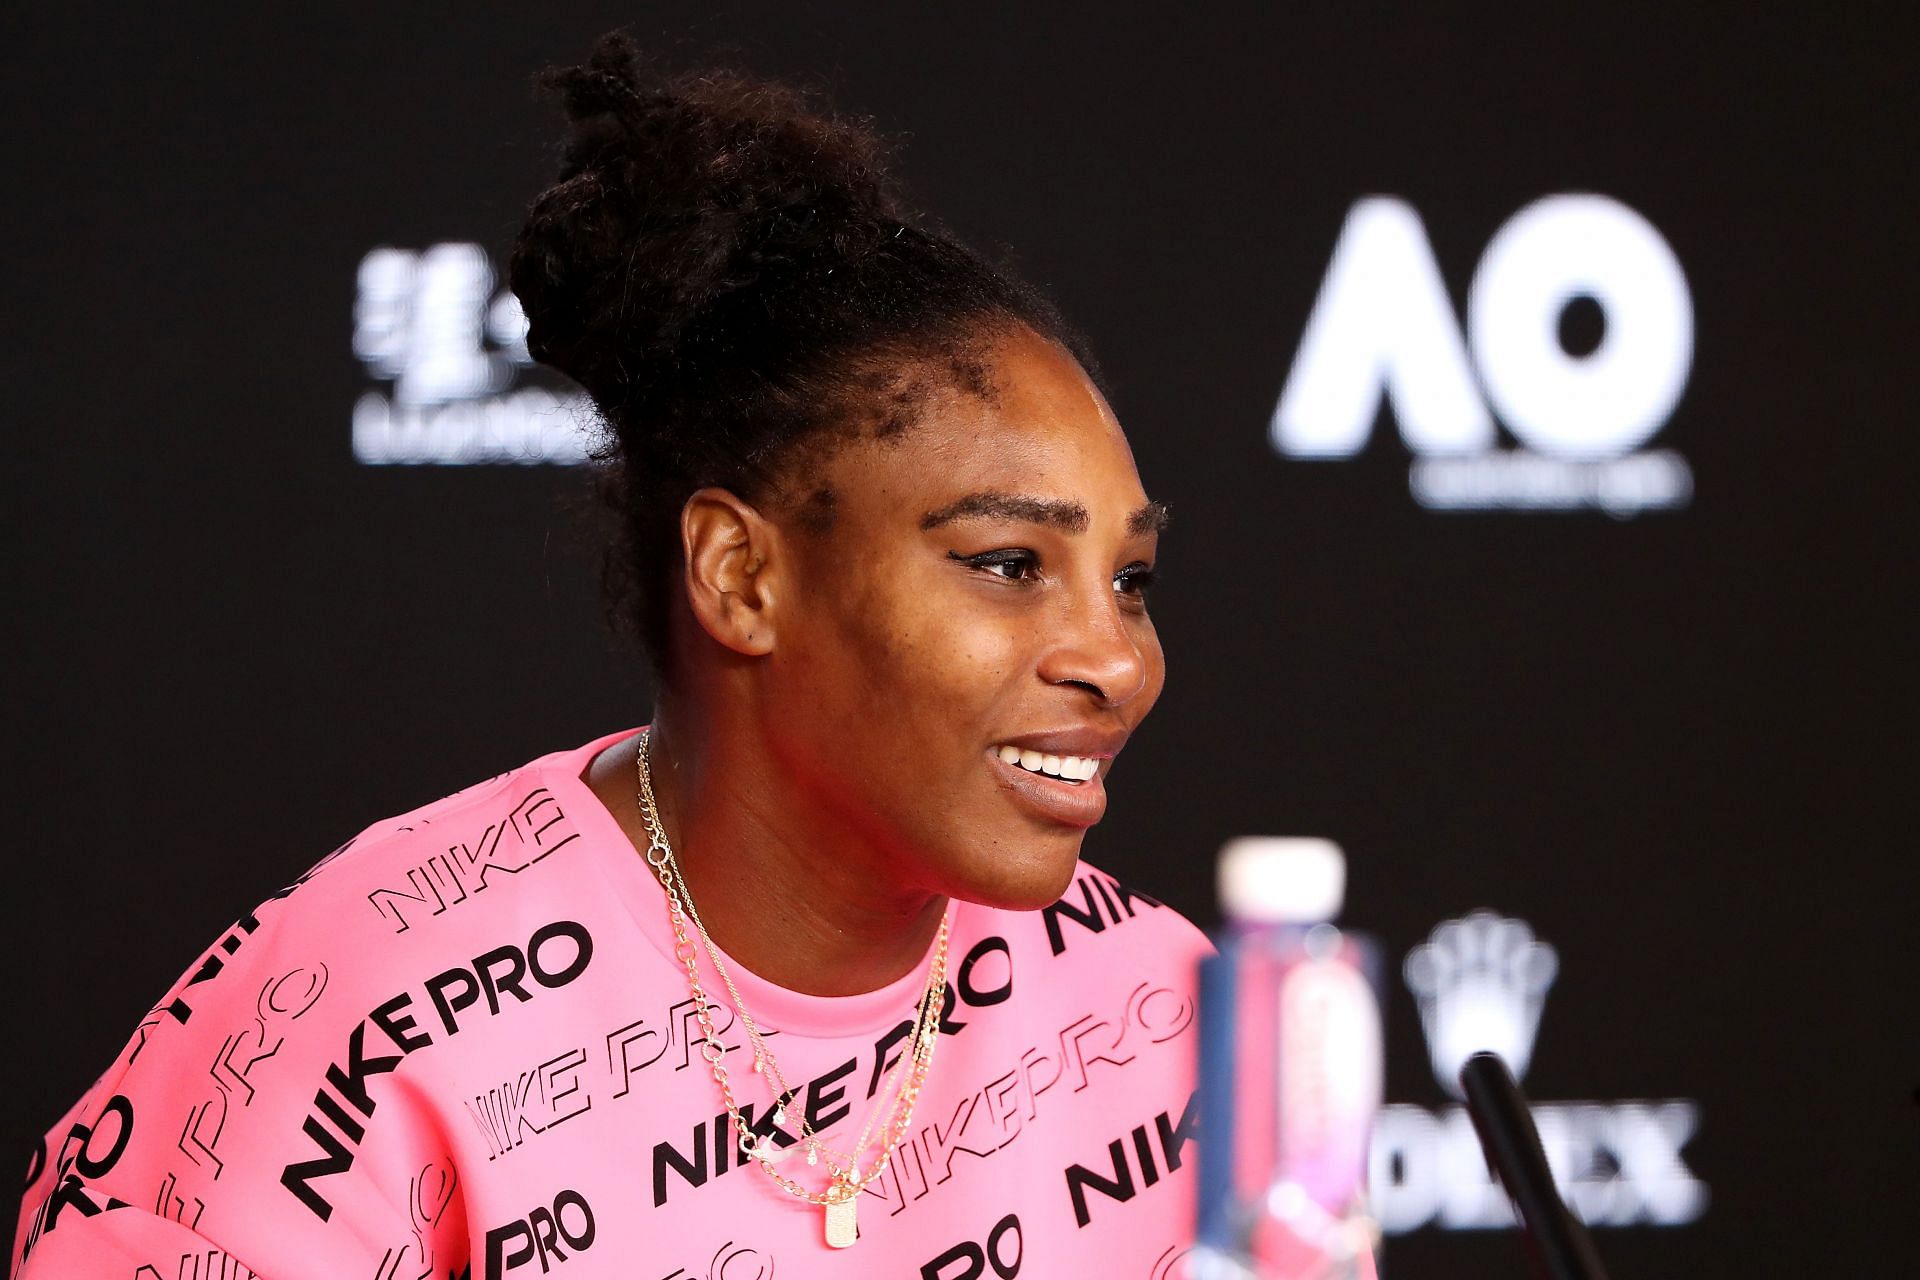 Serena Williams pictured at the 2020 Australian Open